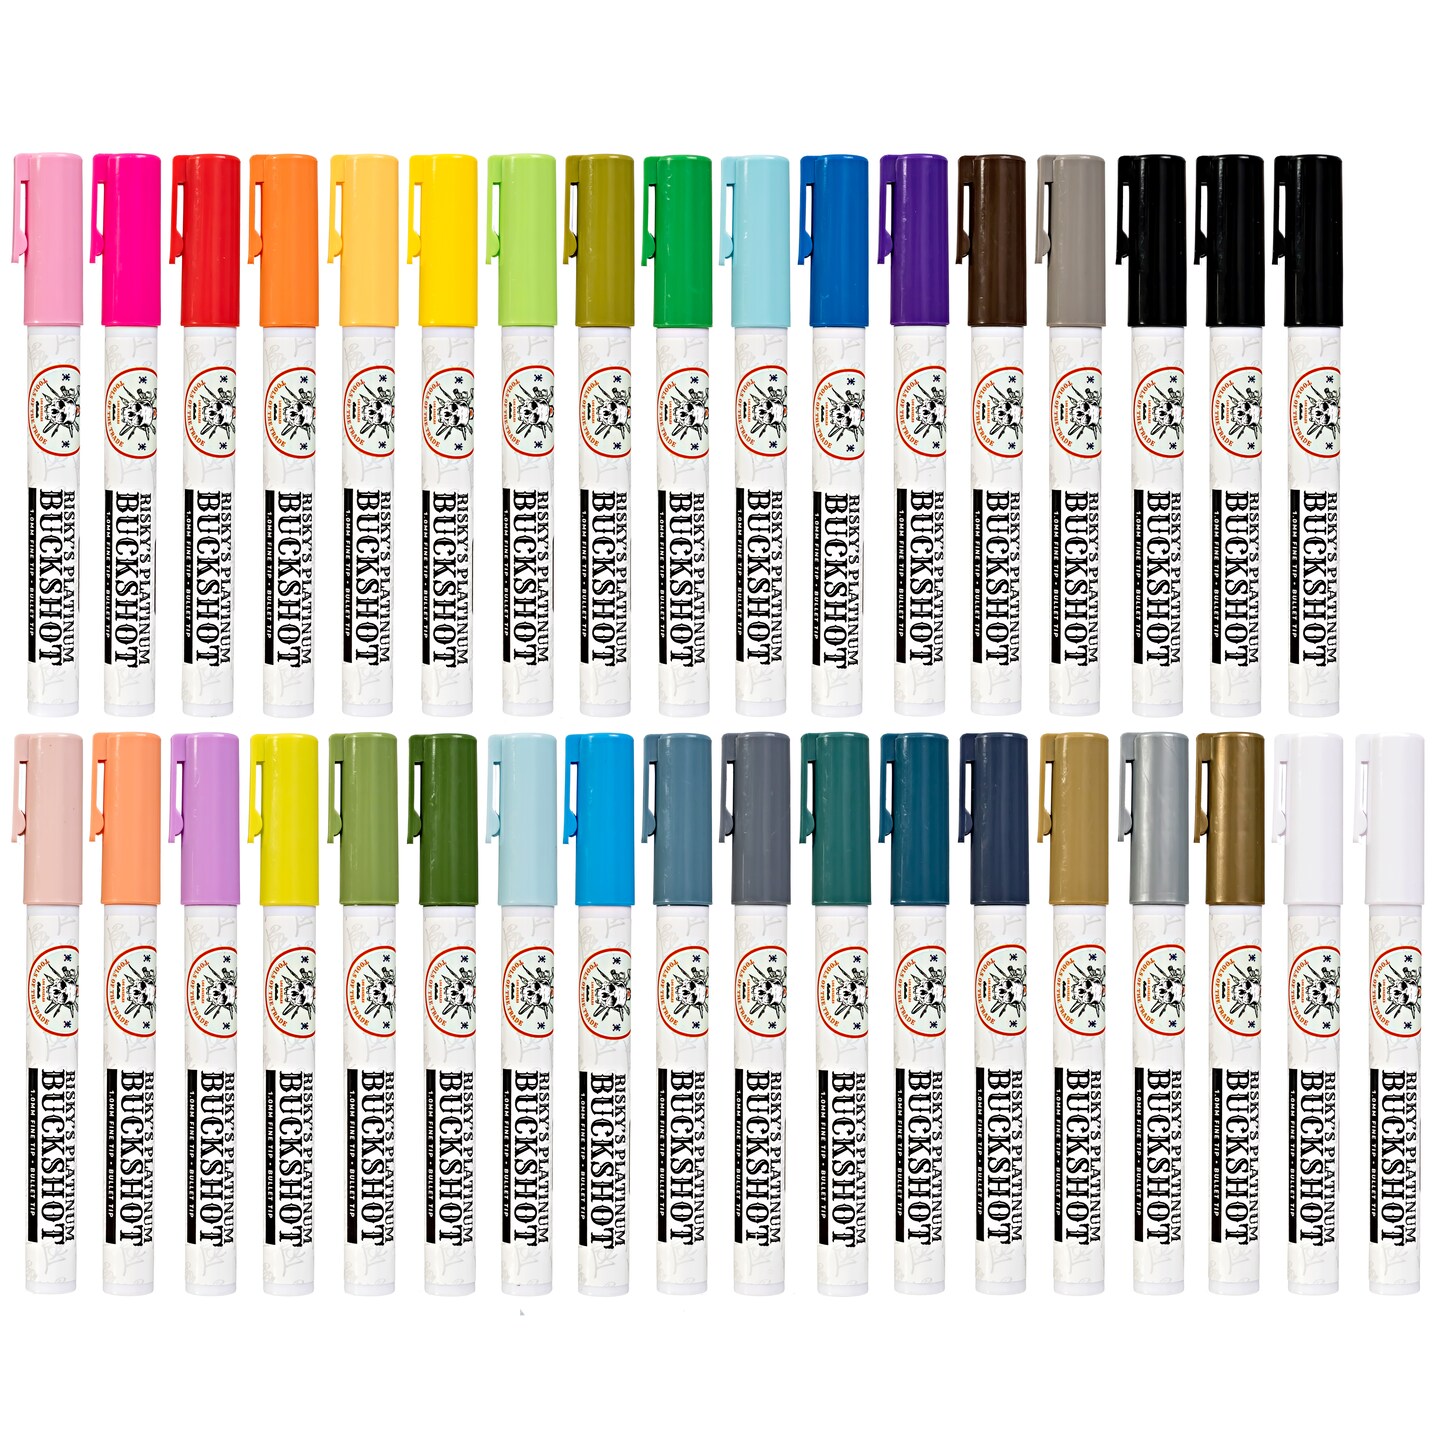 Risky&#x27;s Tools of the Trade- 35 Pack 1mm Acrylic Based Paint Pens for Graffiti and Fine Art.